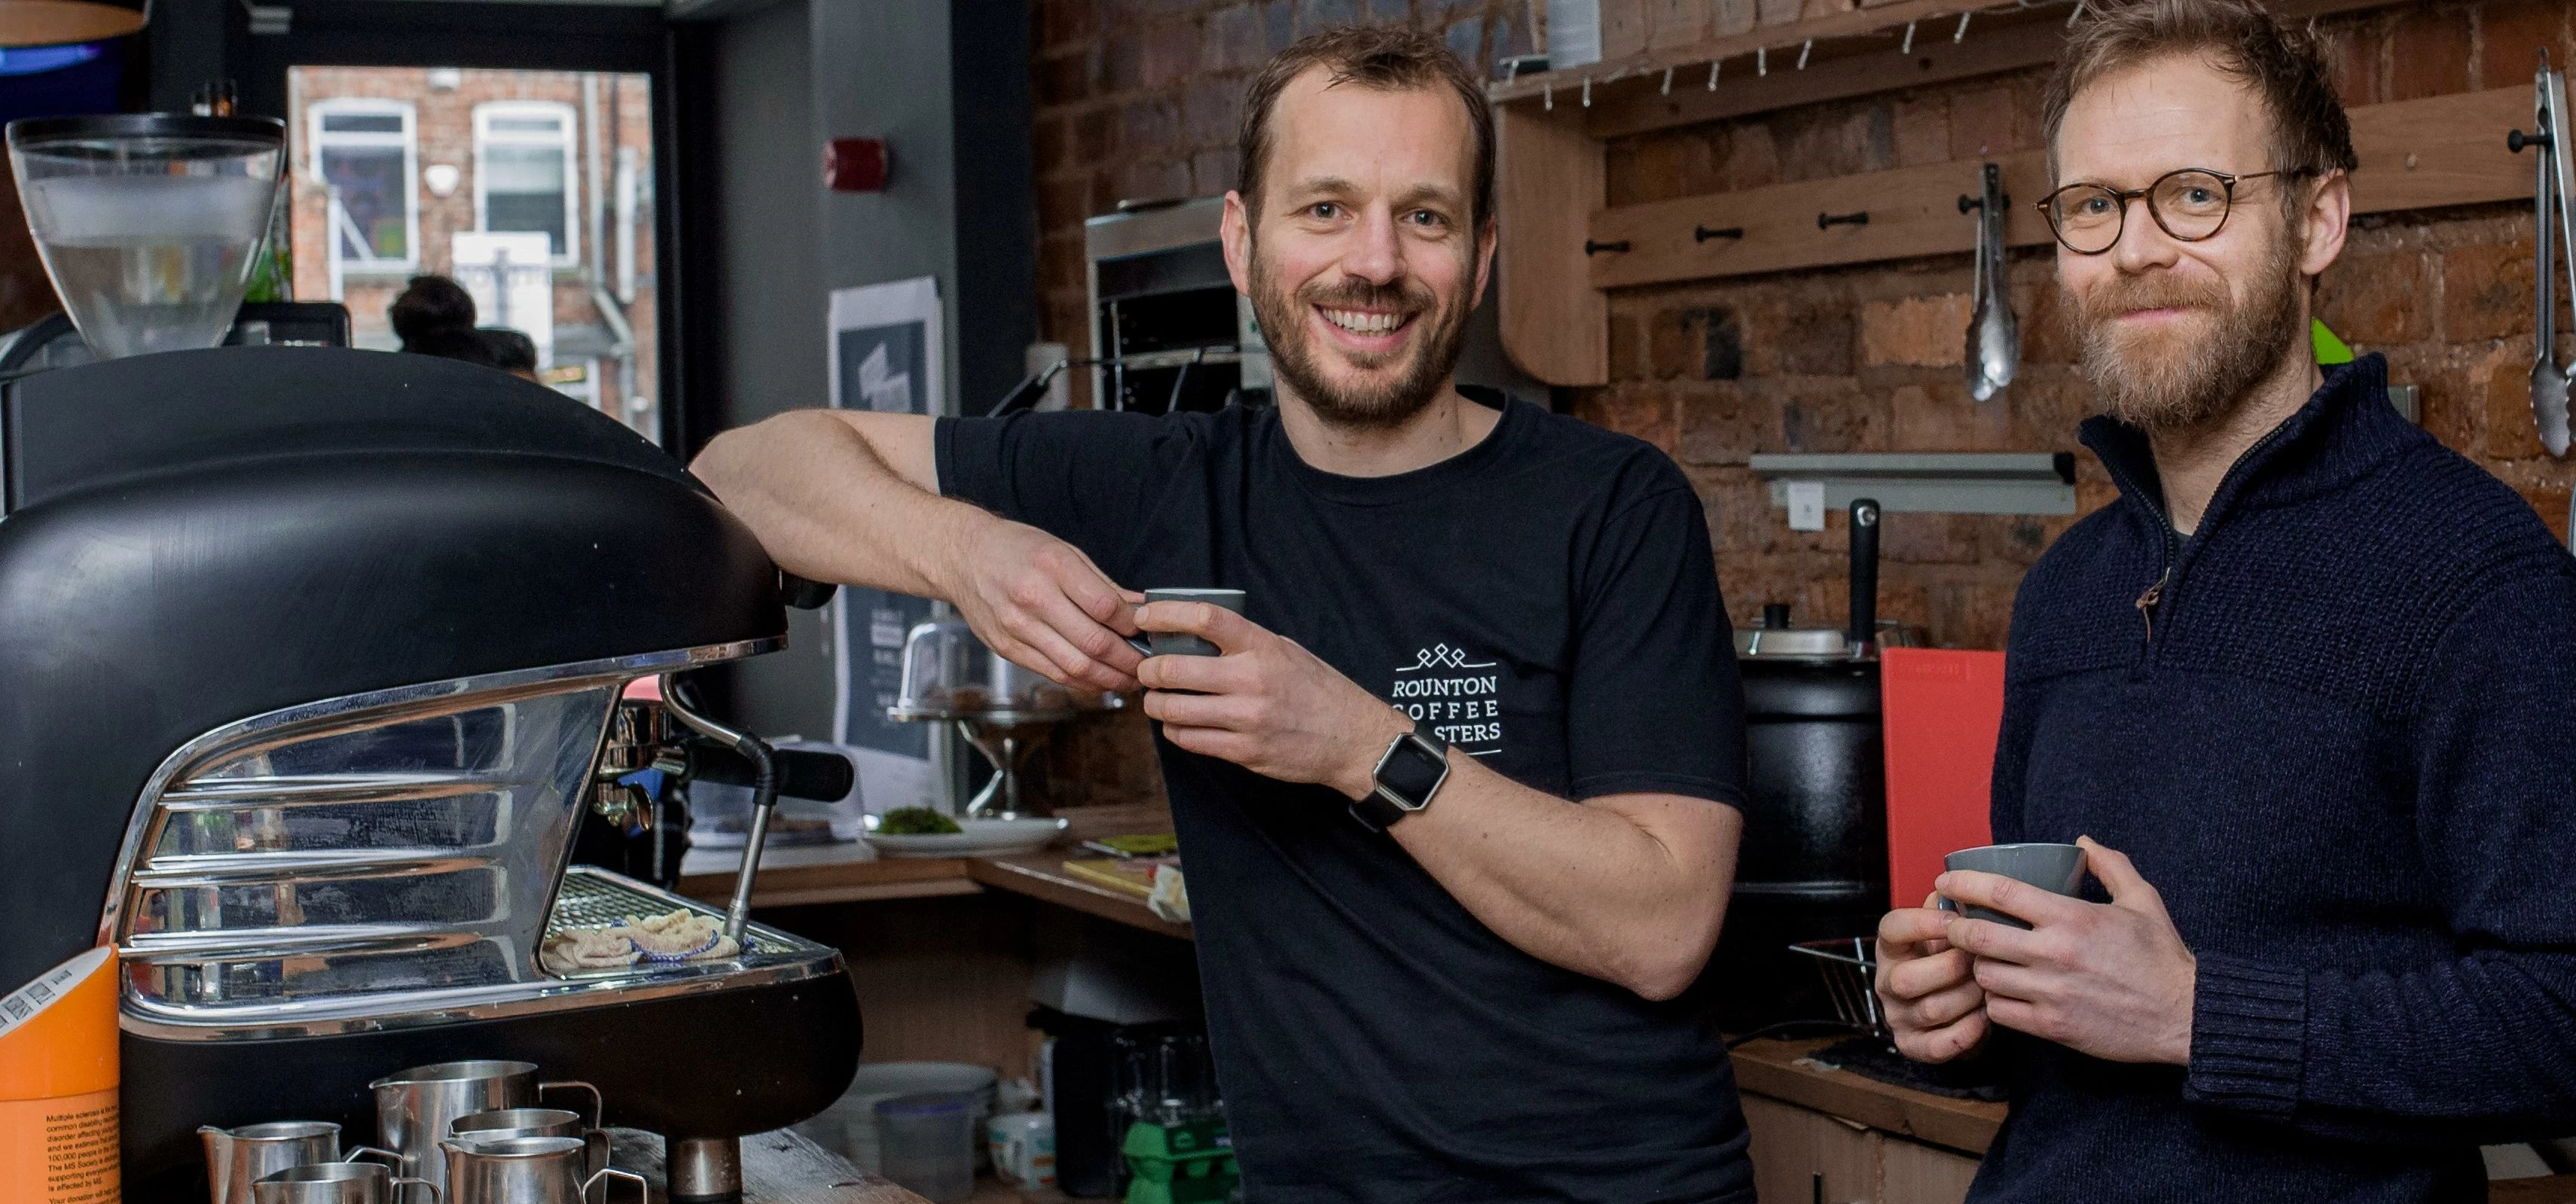  (L-R) Founder of Rounton Coffee and Co-owner of Bedford Street Coffee House, David Beattie and Co-o